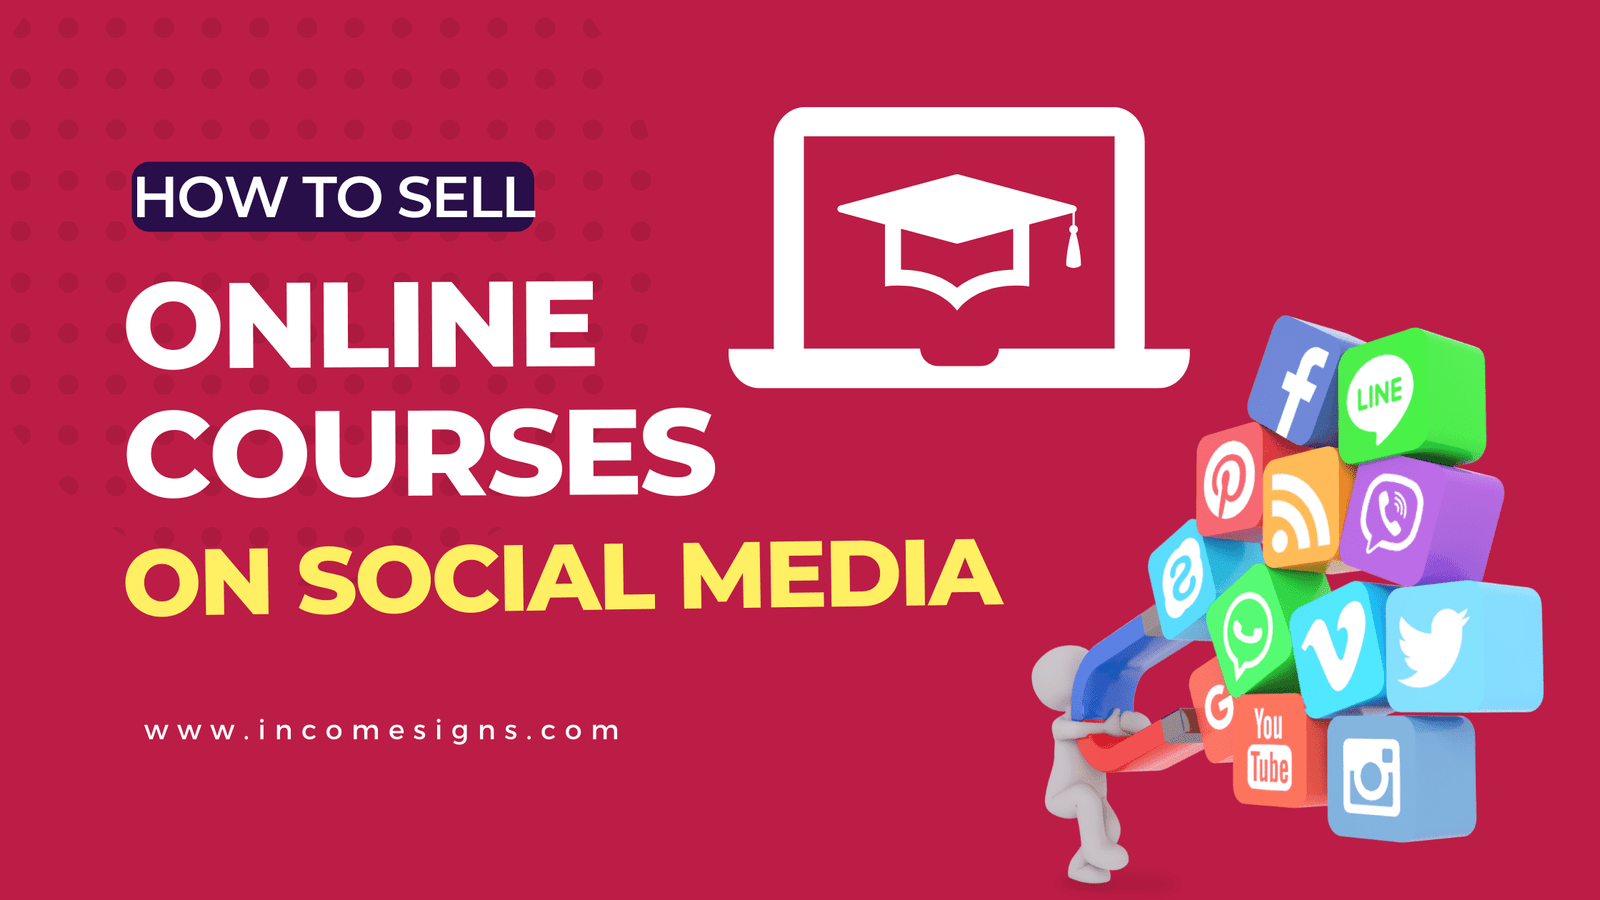 How to Sell Online Courses on Social Media